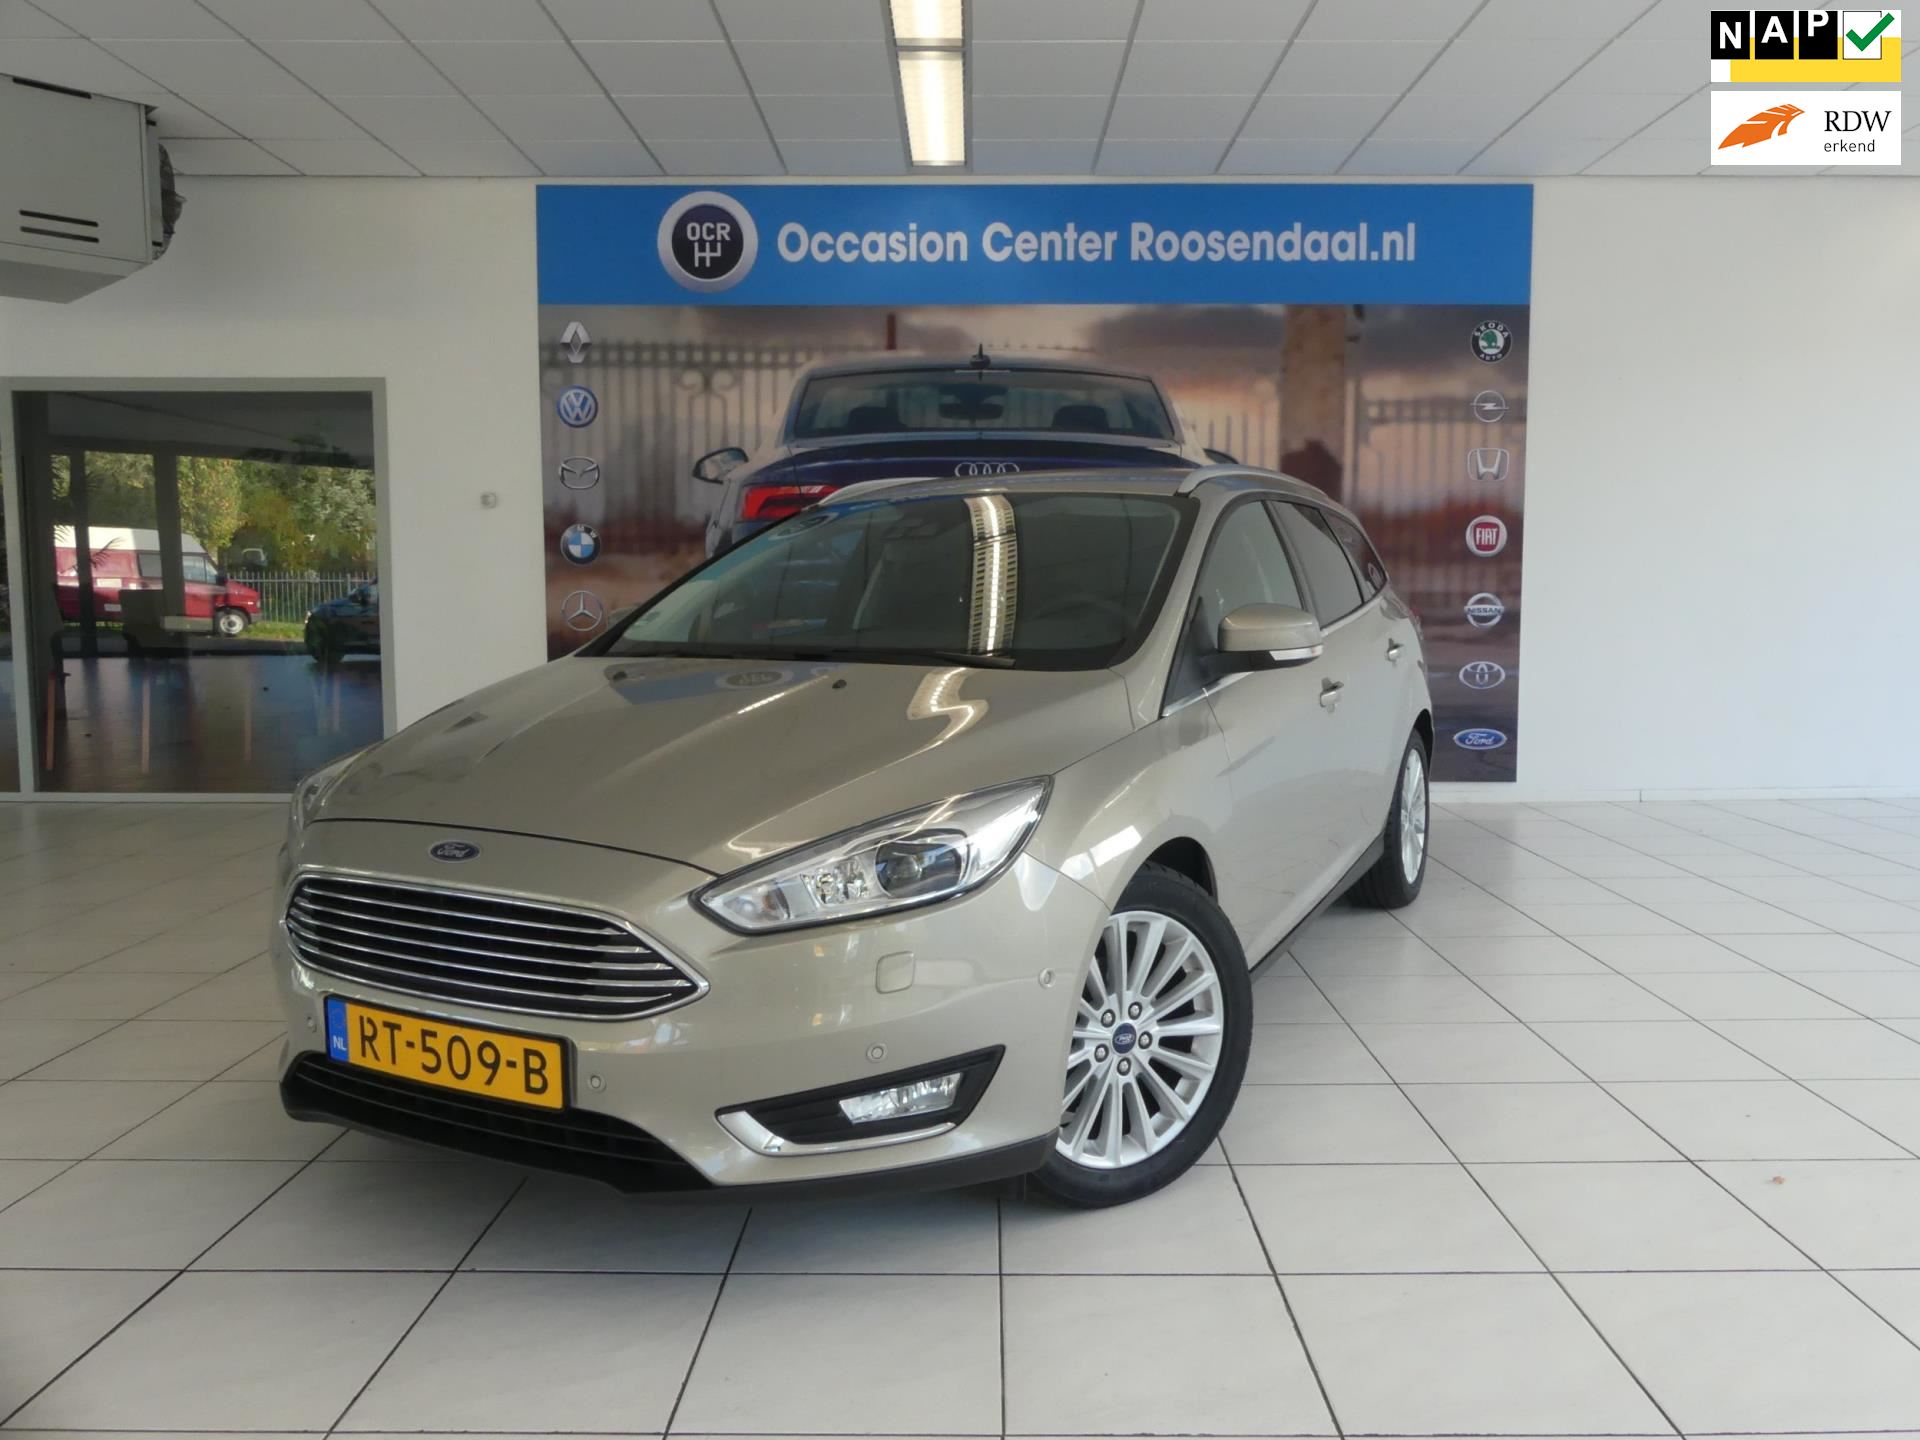 Ford Focus Wagon occasion - Occasion Center Roosendaal